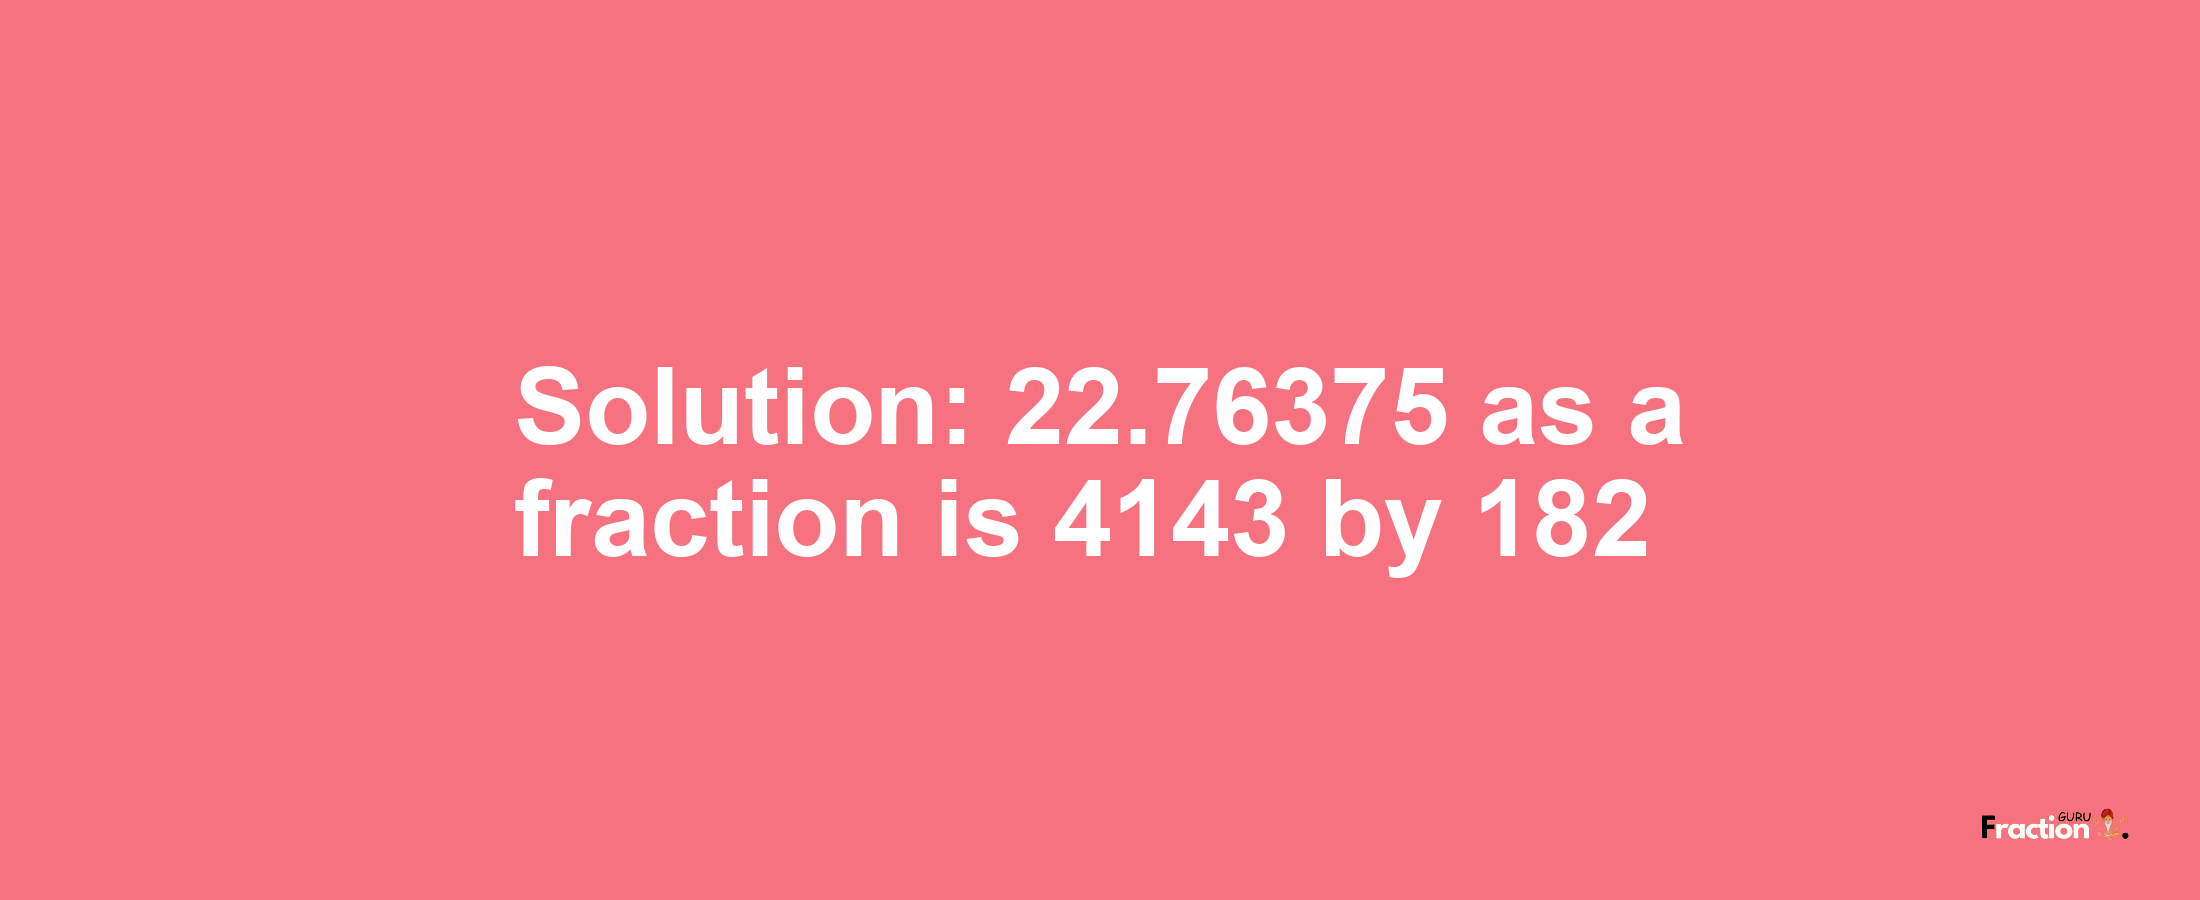 Solution:22.76375 as a fraction is 4143/182